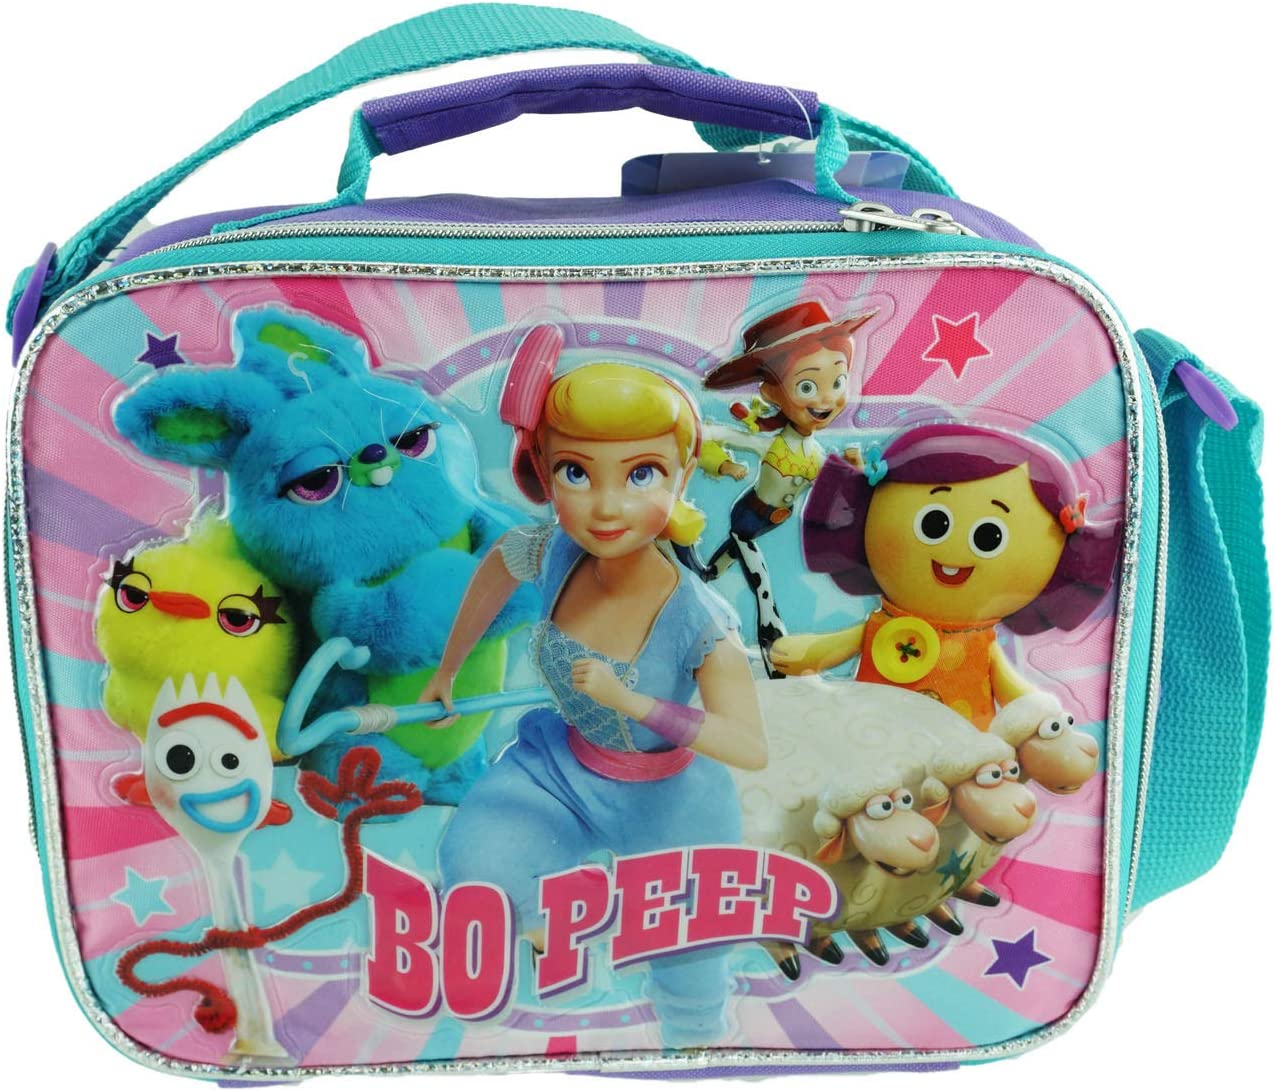 Toy Story 4 Insulated Lunch Box With Adjustable Shoulder Straps - Bo Peep - A17325